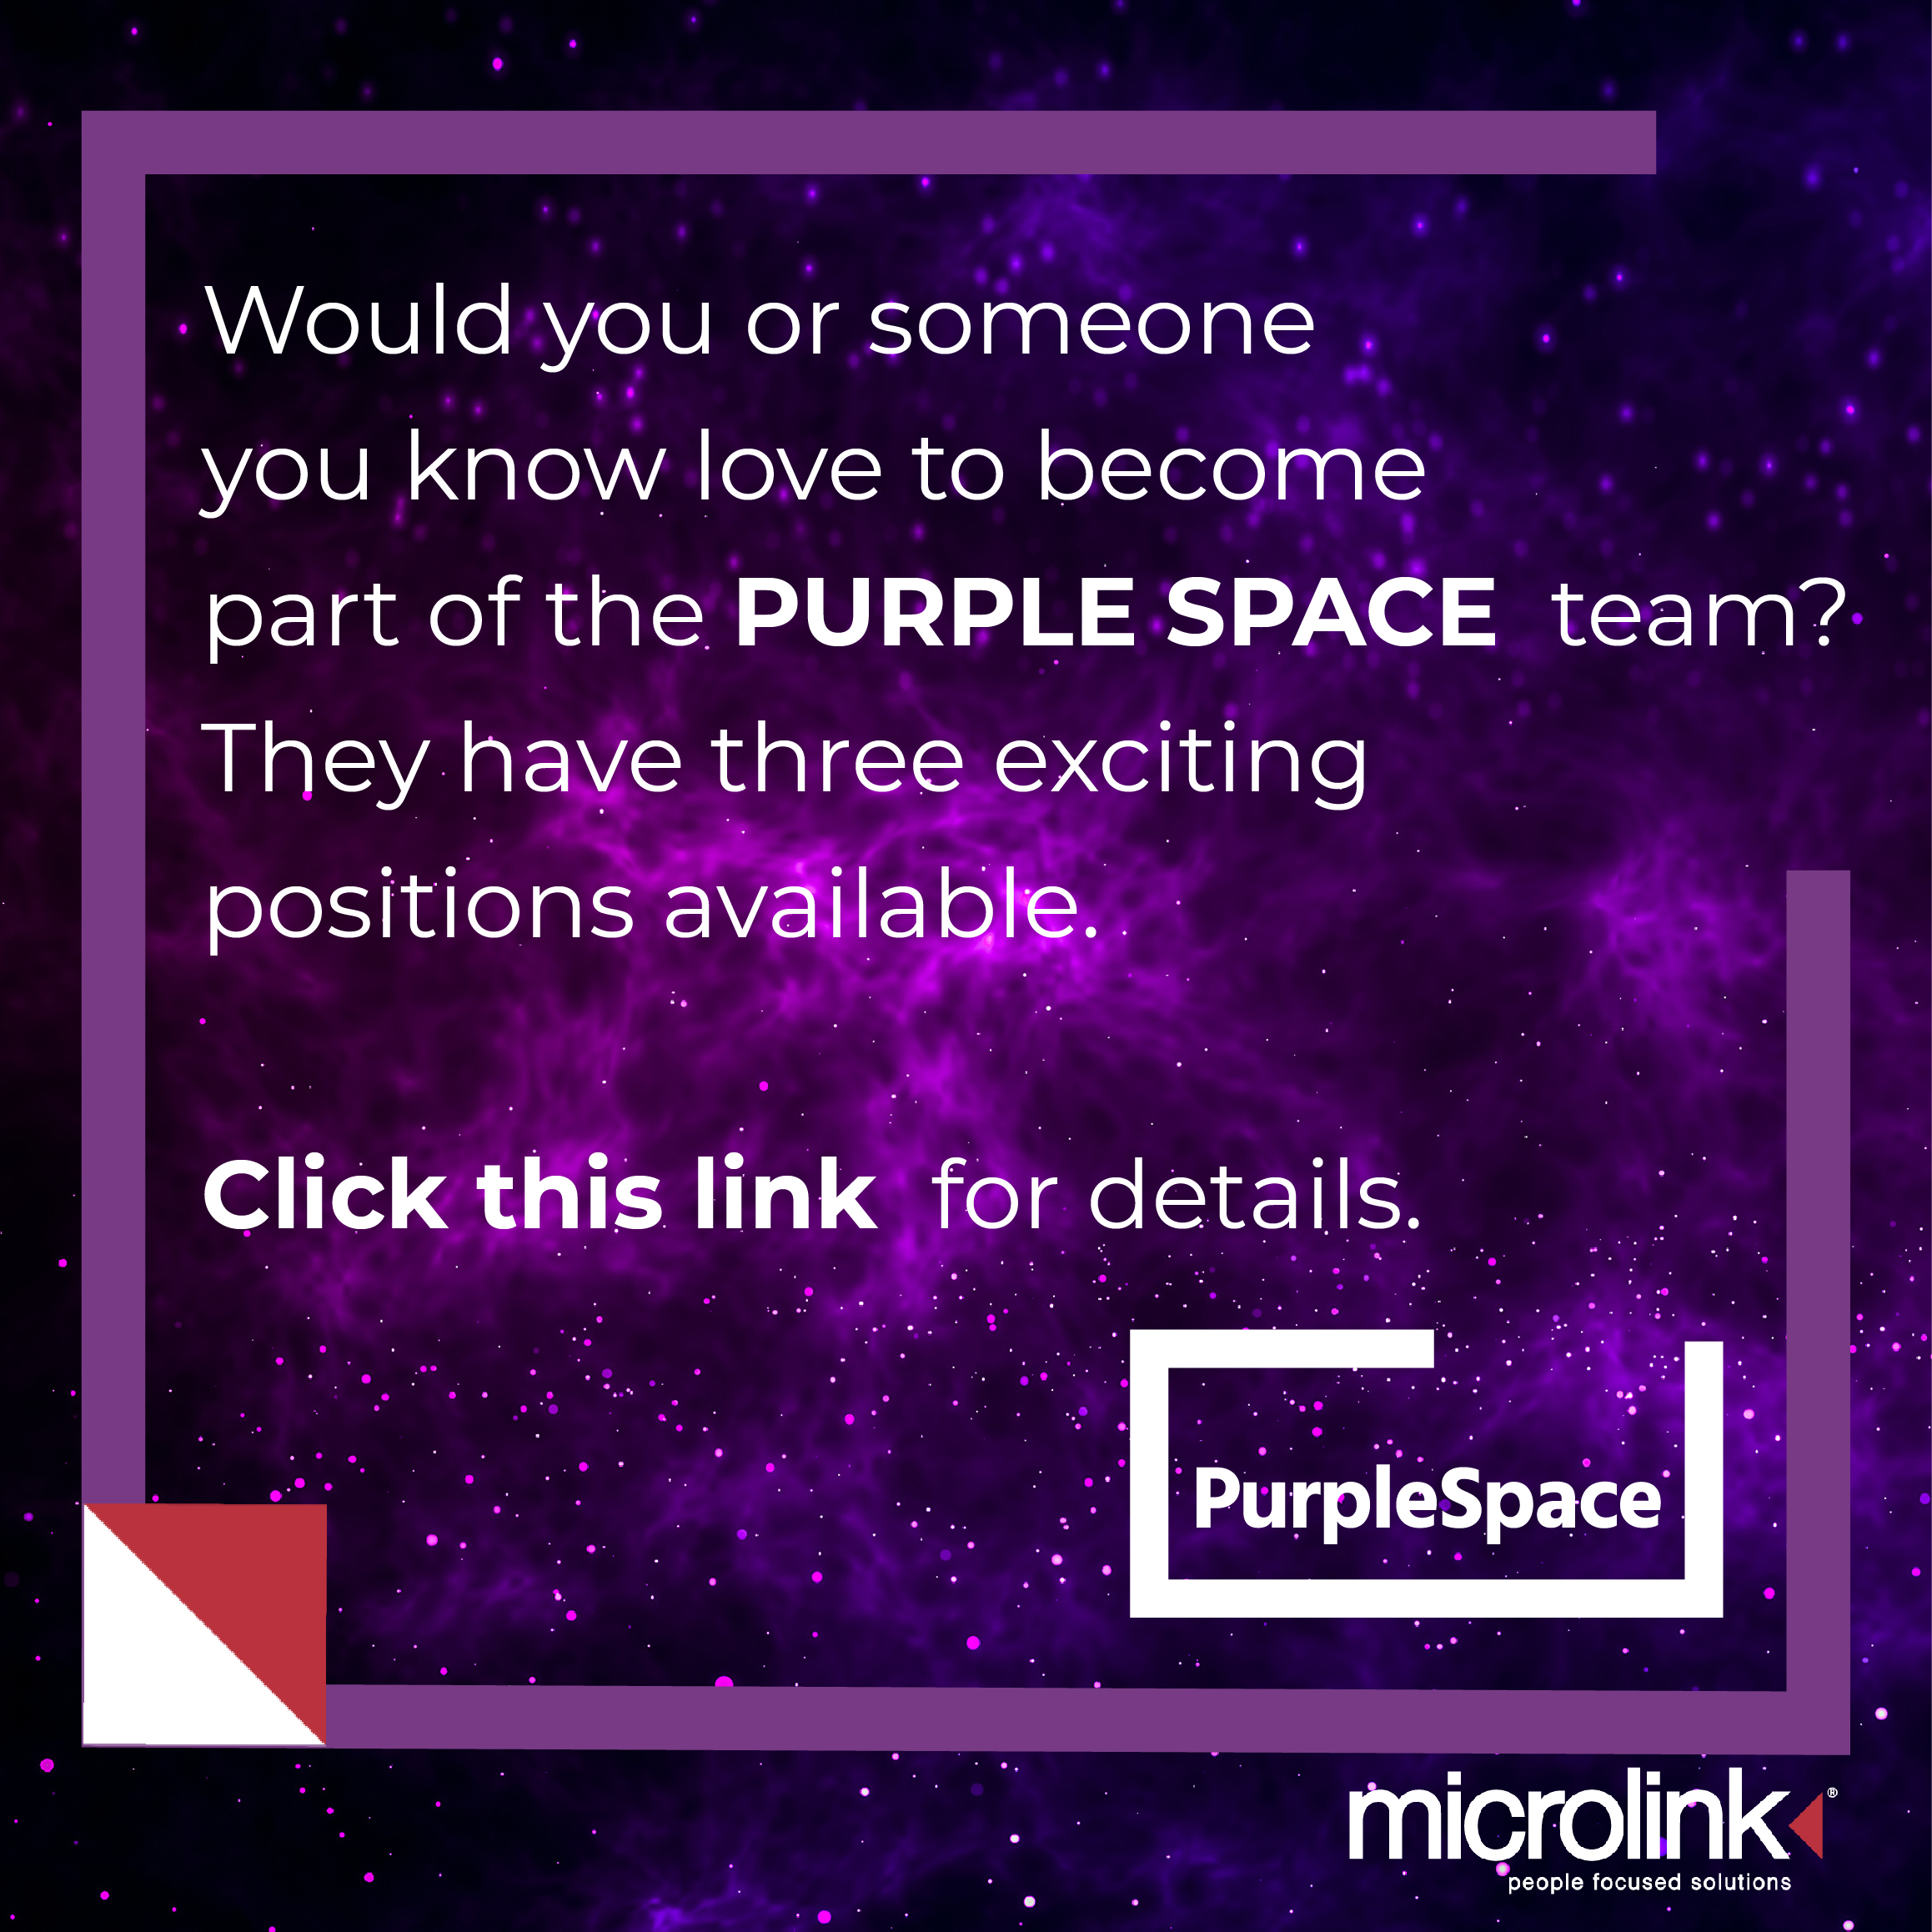 Do you want to become a Purple Space team? Click on the link below